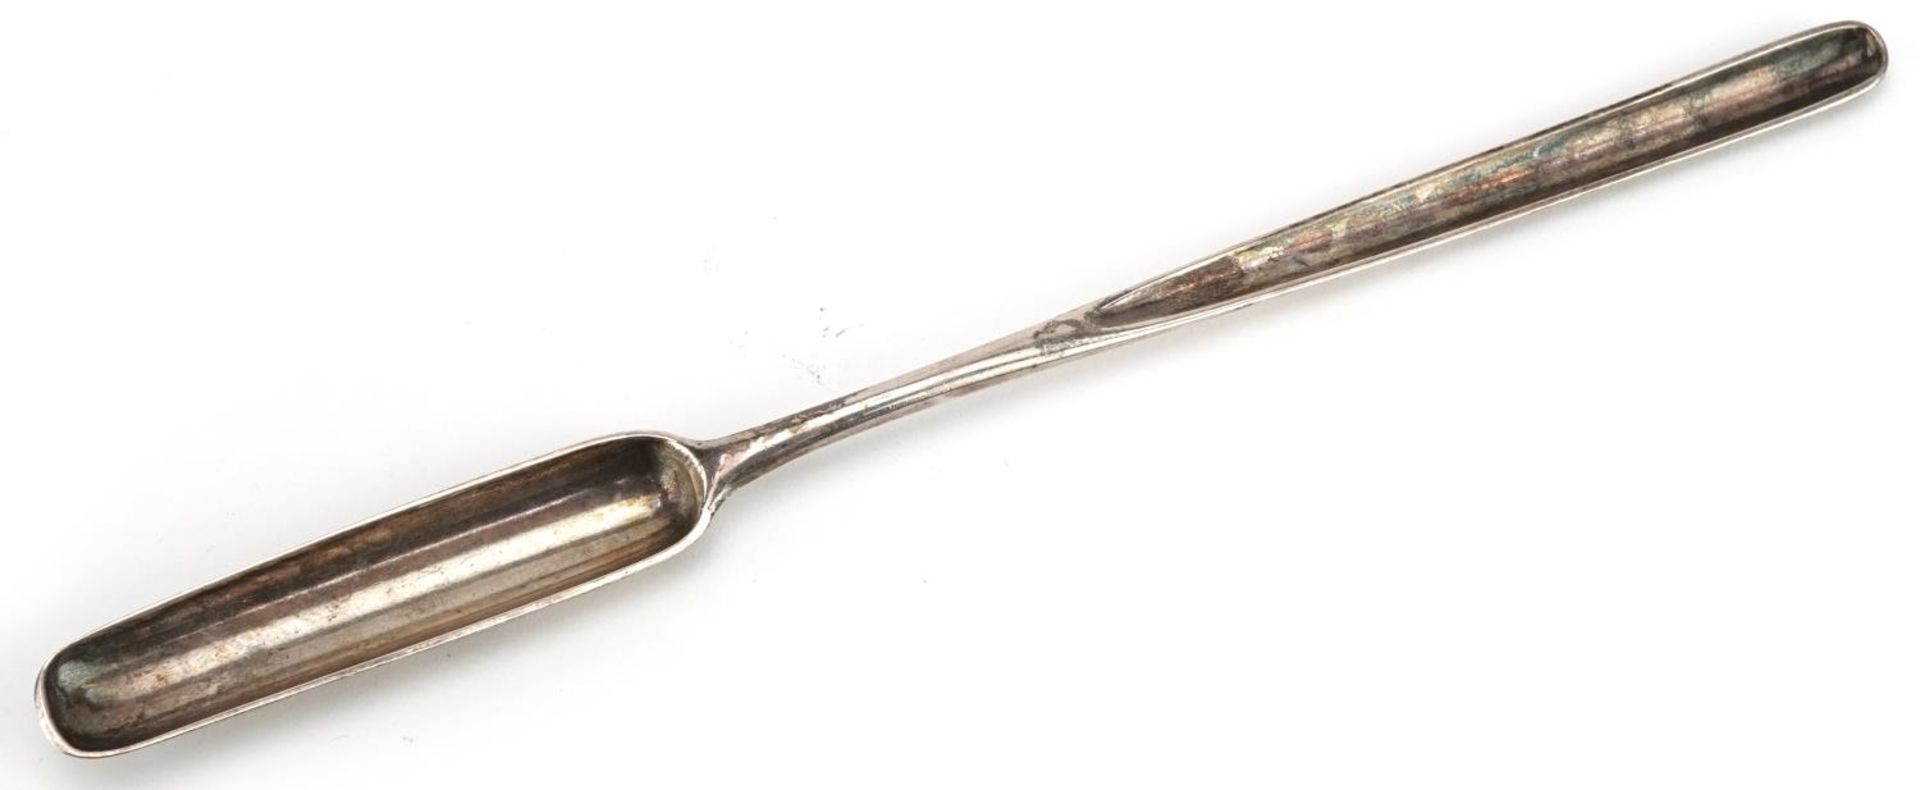 Antique silver double ended marrow scoop, indistinct hallmarks, 23cm in length, 40.0g : For